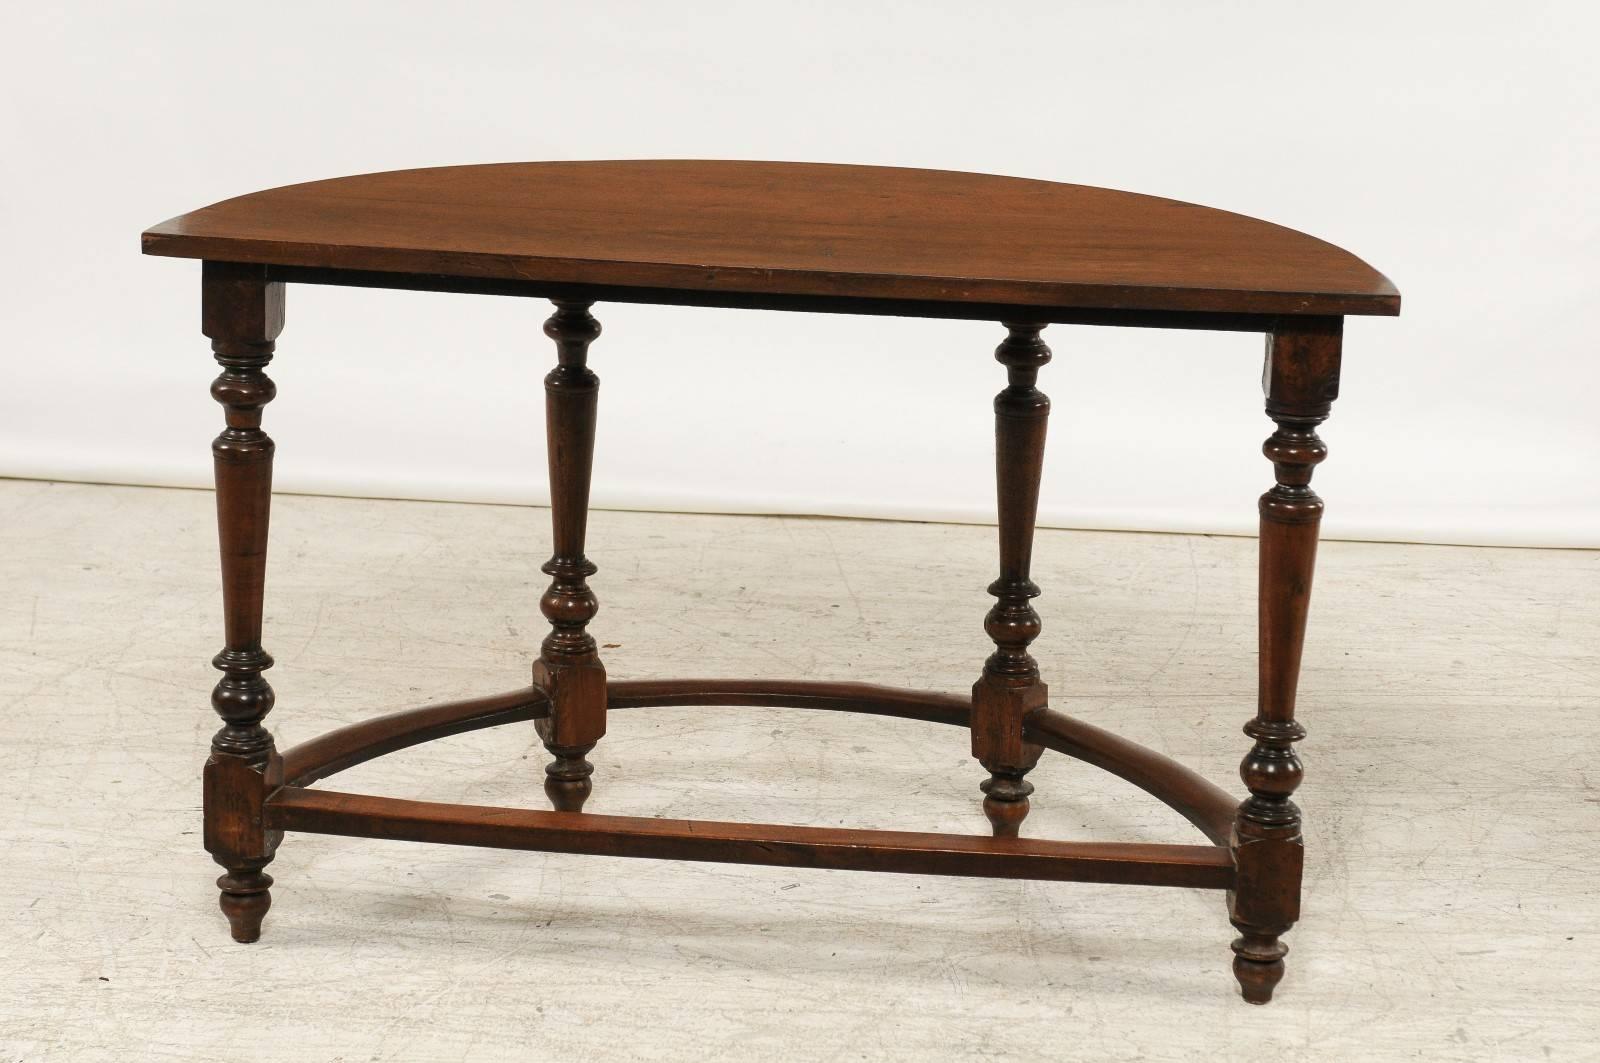 Pair of Large 1820s Italian Walnut Demilune Console Tables with Turned Legs 3